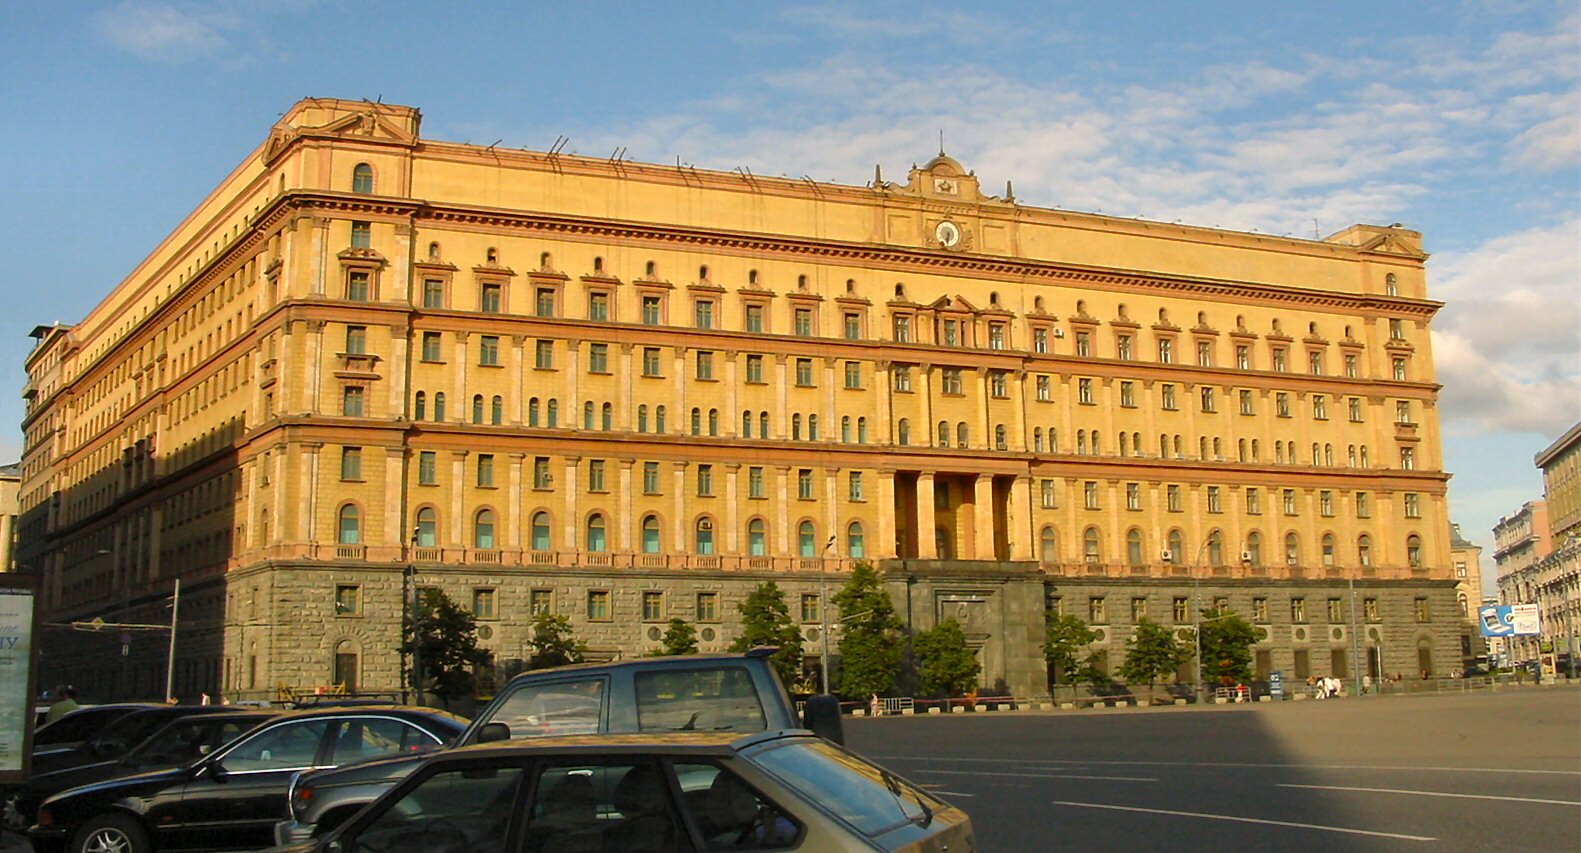 Lubyanka Building, Moscow, Russia, 8 Aug 2003